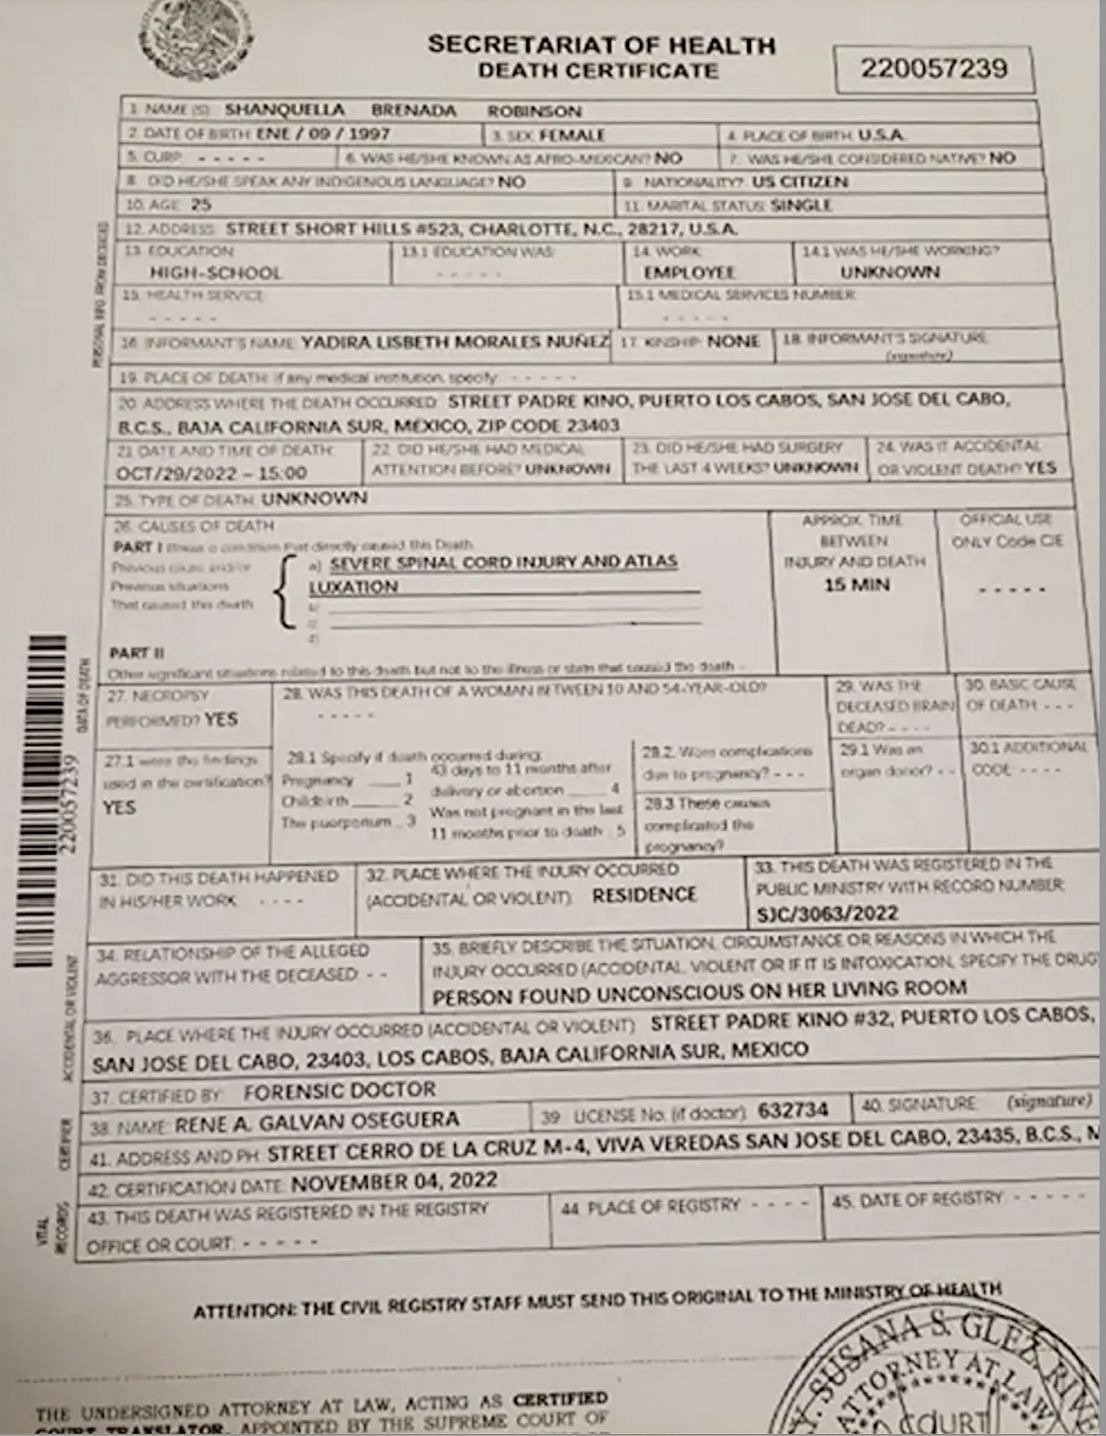 The death certificate of Robinson produced initially does not state anything about her being alive for 3 hours after the accident. (Image via WSOC TV)